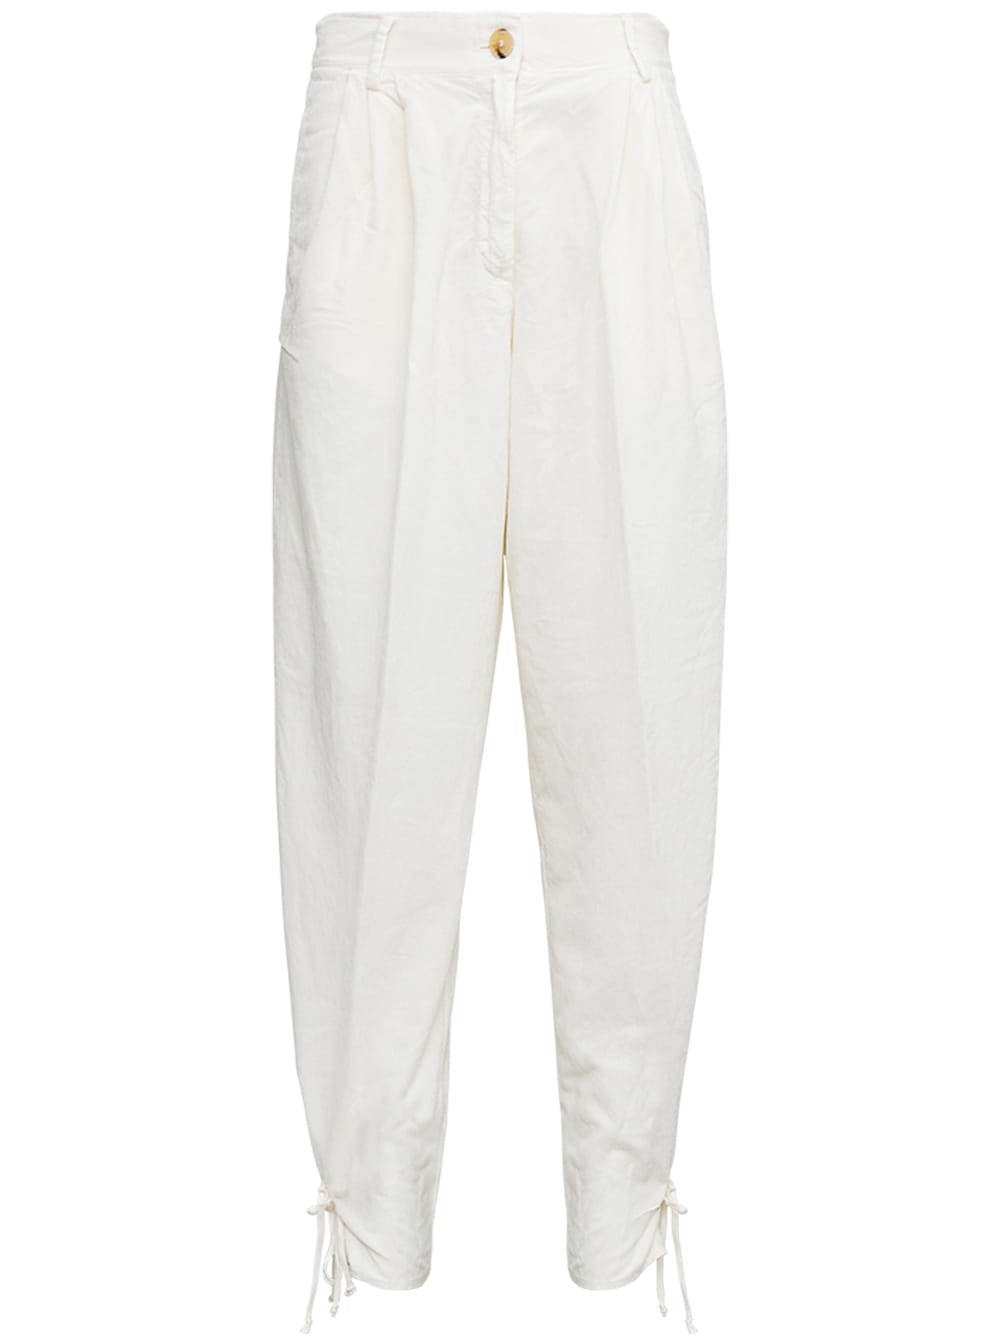 Forte Forte White Viscose Blend Pants With Bows Detail